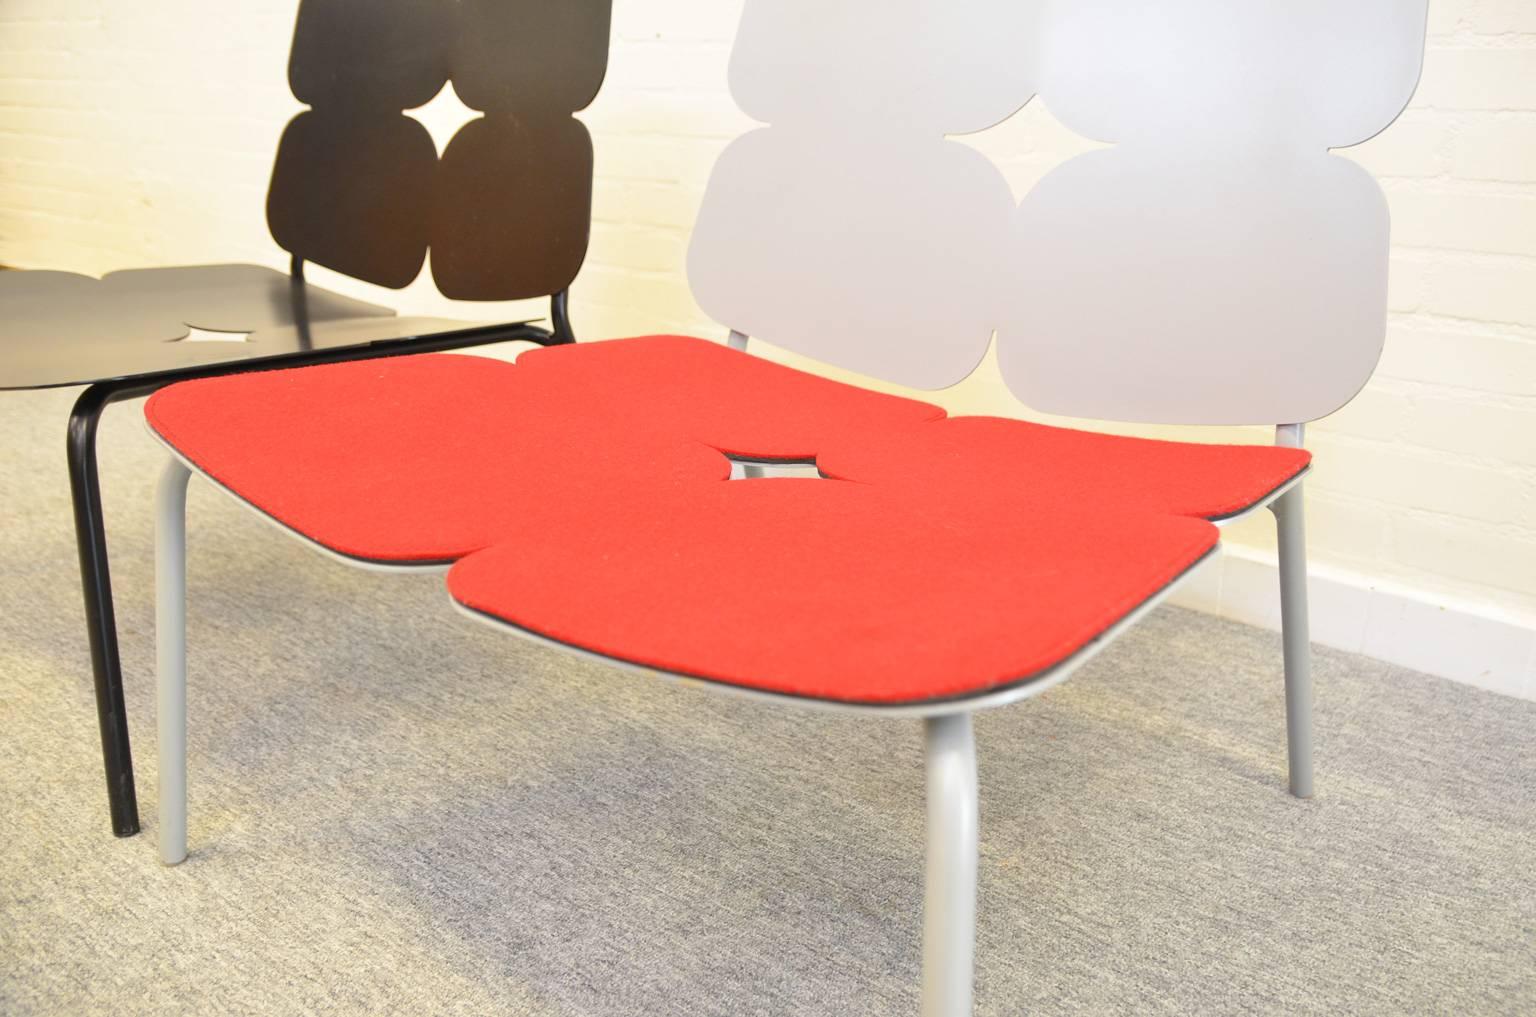 This easy chair was produced as a limited edition by Italian firm Bart Design (ceased in 2006). The red felt cushion is optional (there is only one available).